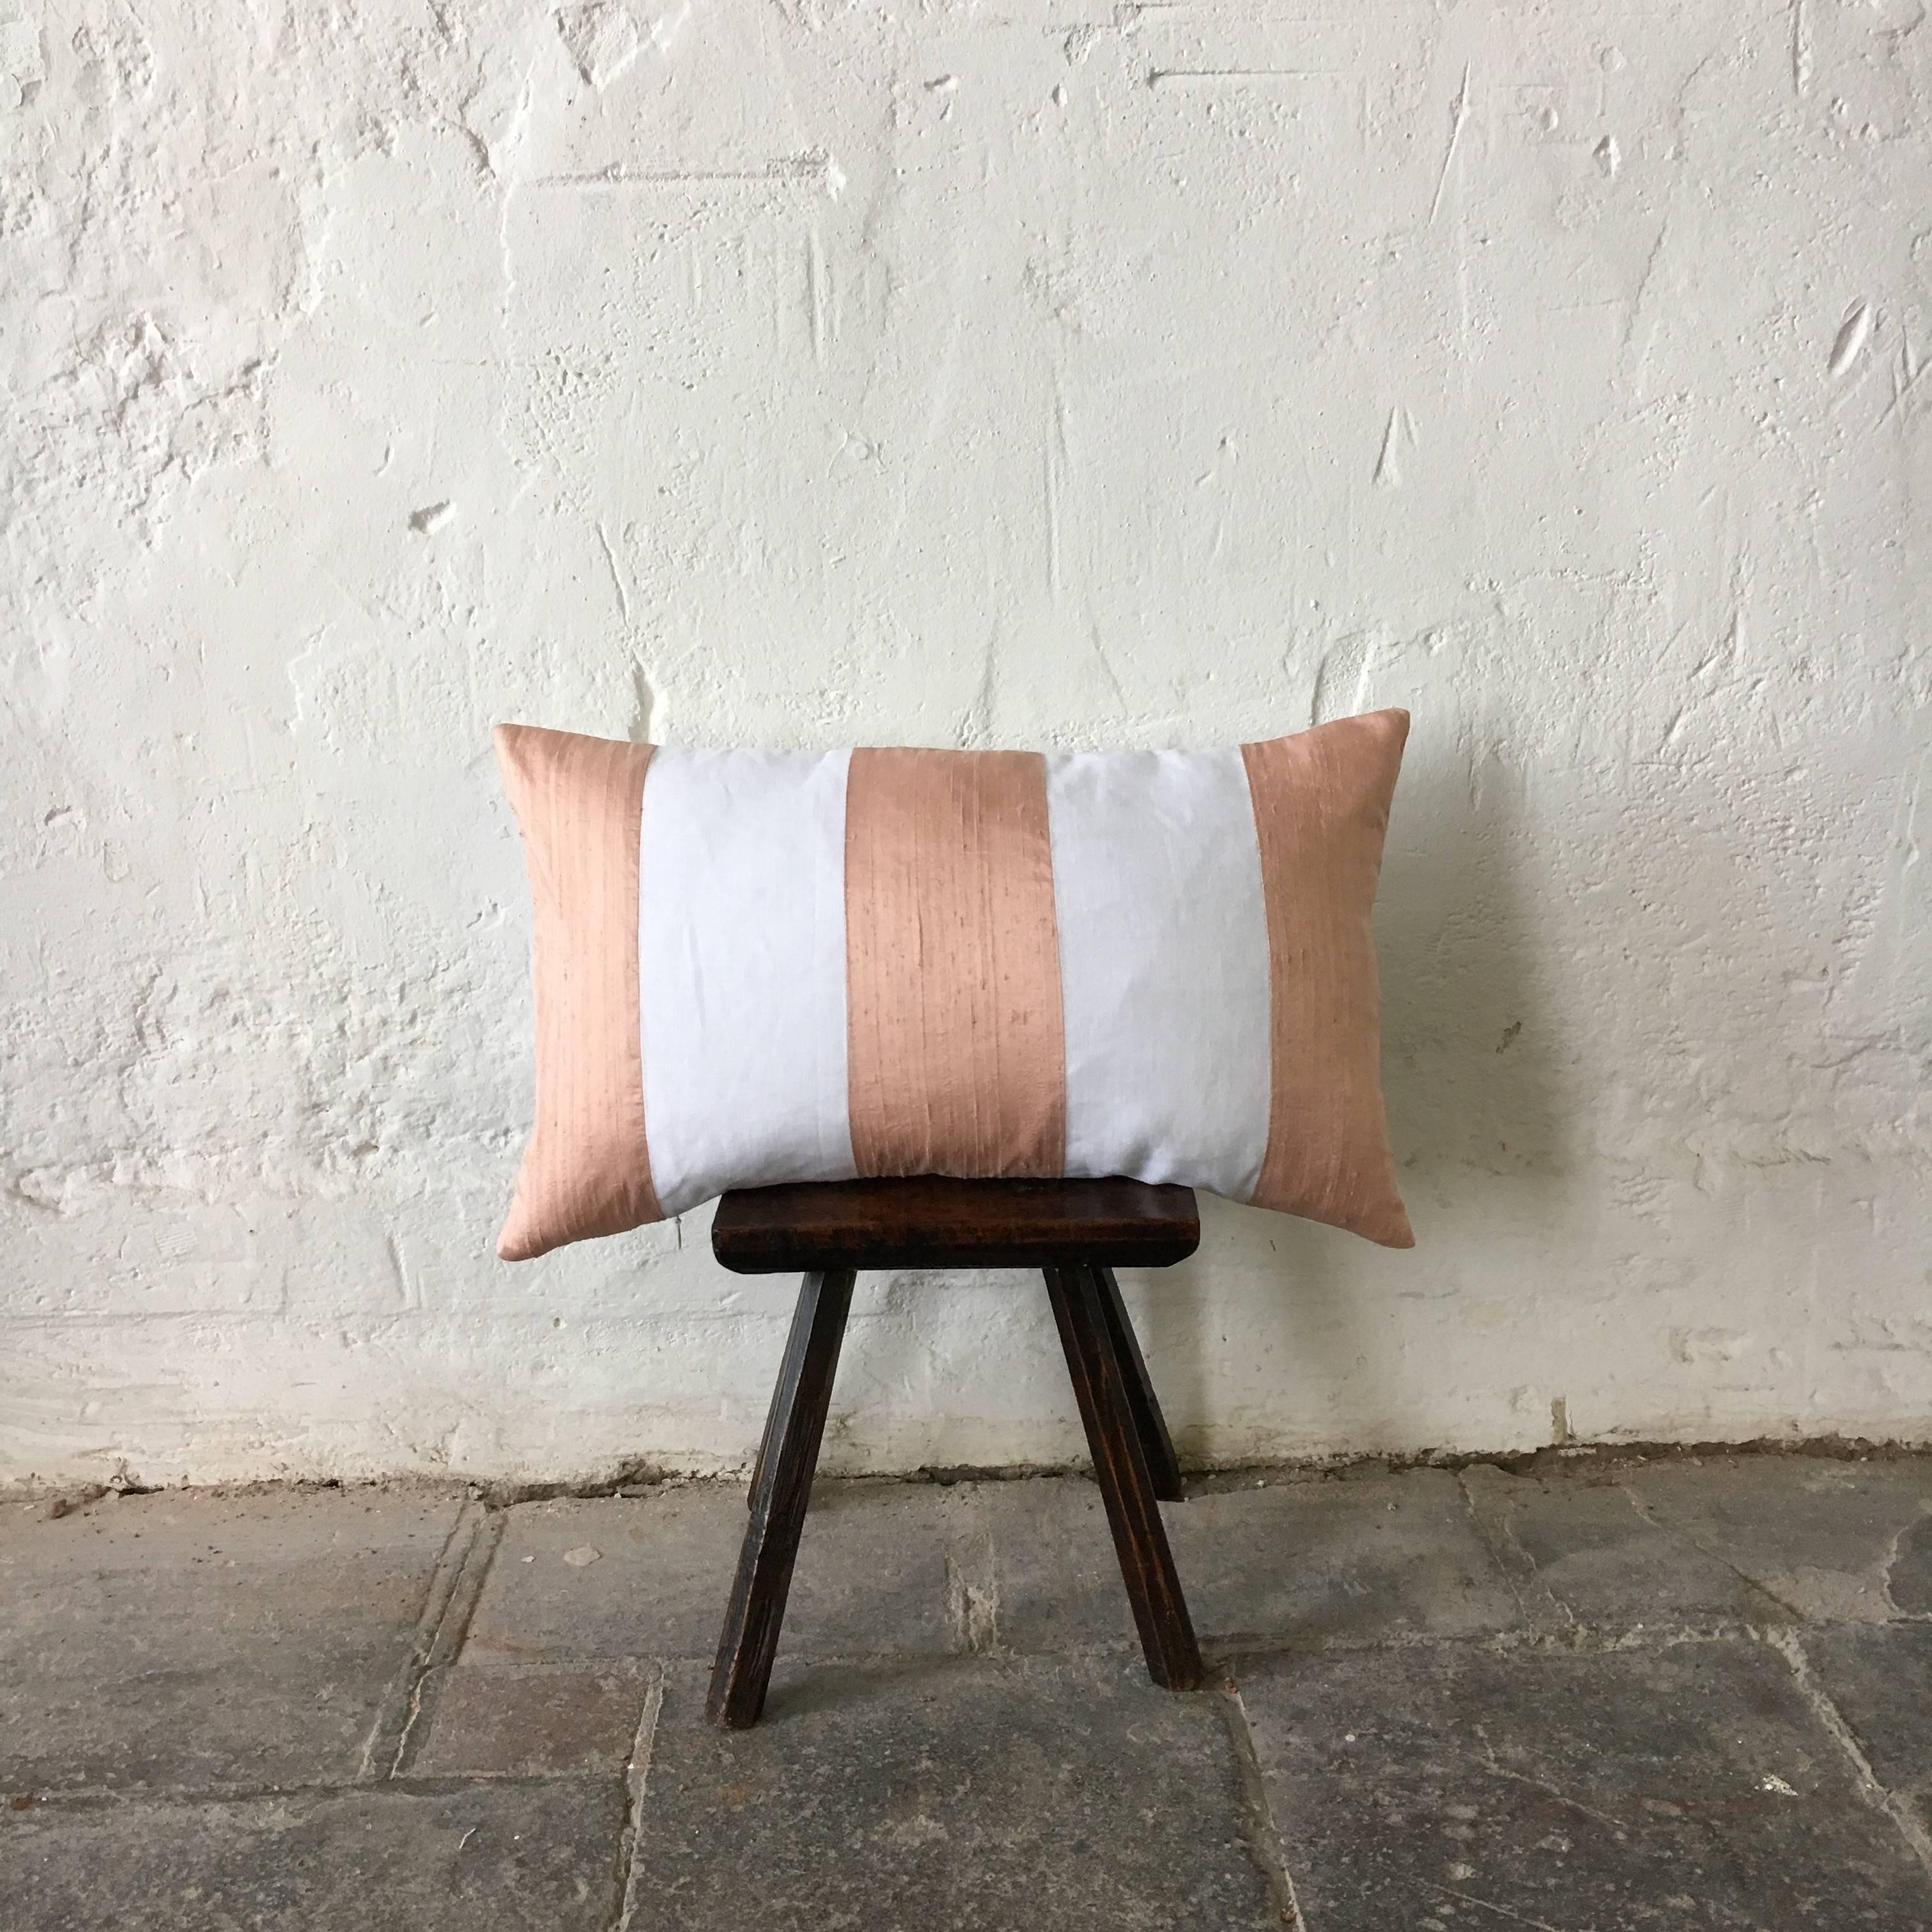 A custom-made contemporary luxury cushion (pillow) constructed with antique elements by using fragments of precious fabric. Antique 100% pure raw silk, with beautiful visible texture of ‘slubs’ (the nibbly bits) and grain from being handwoven giving